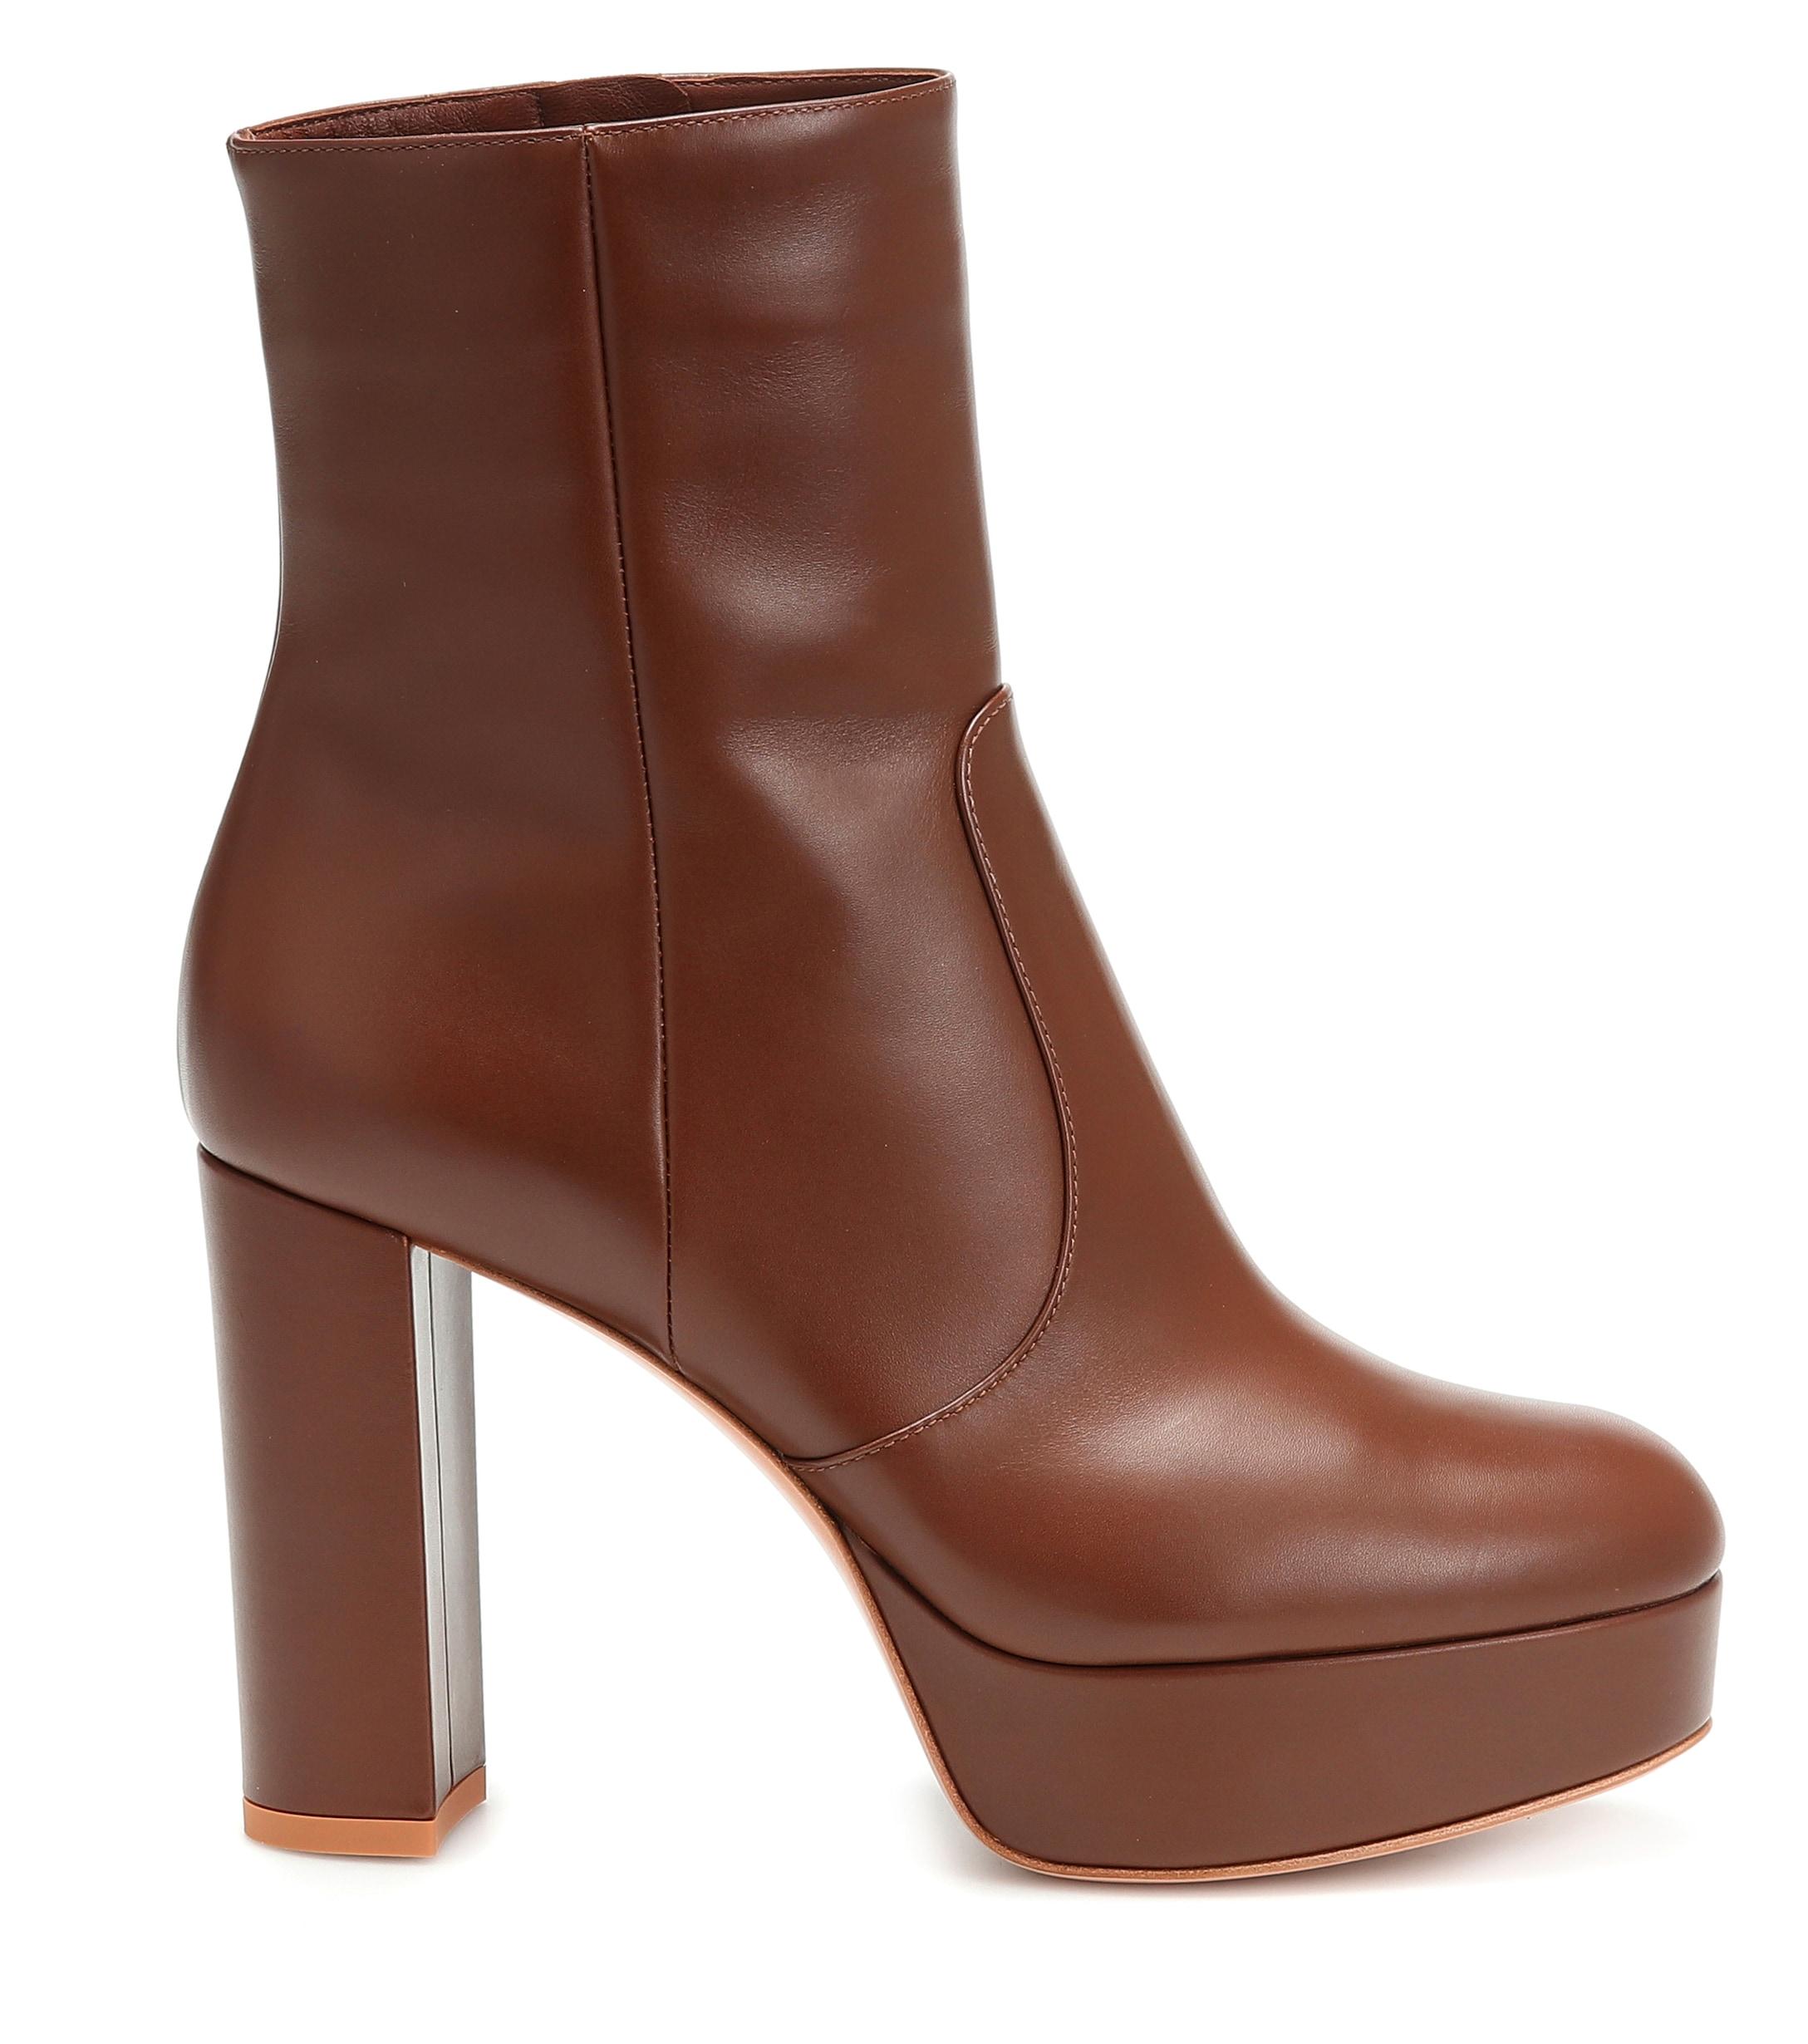 Gianvito Rossi Leather Plateau Ankle Boots in Brown - Lyst